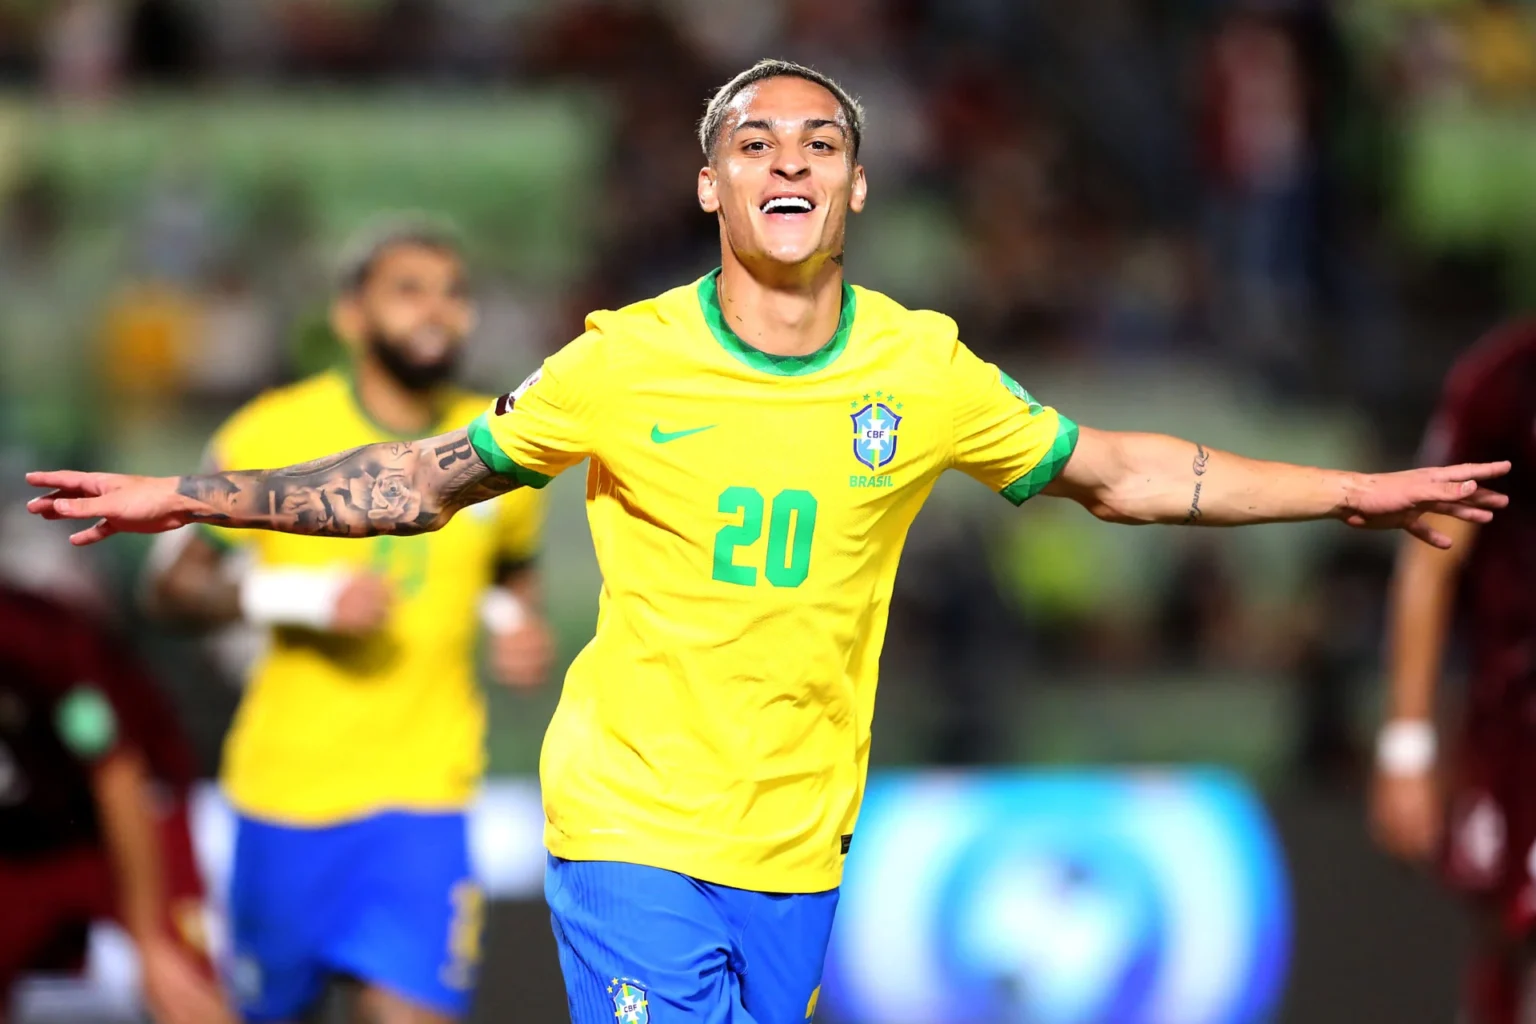 Antony: Brazil drop Manchester United winger after abuse allegations